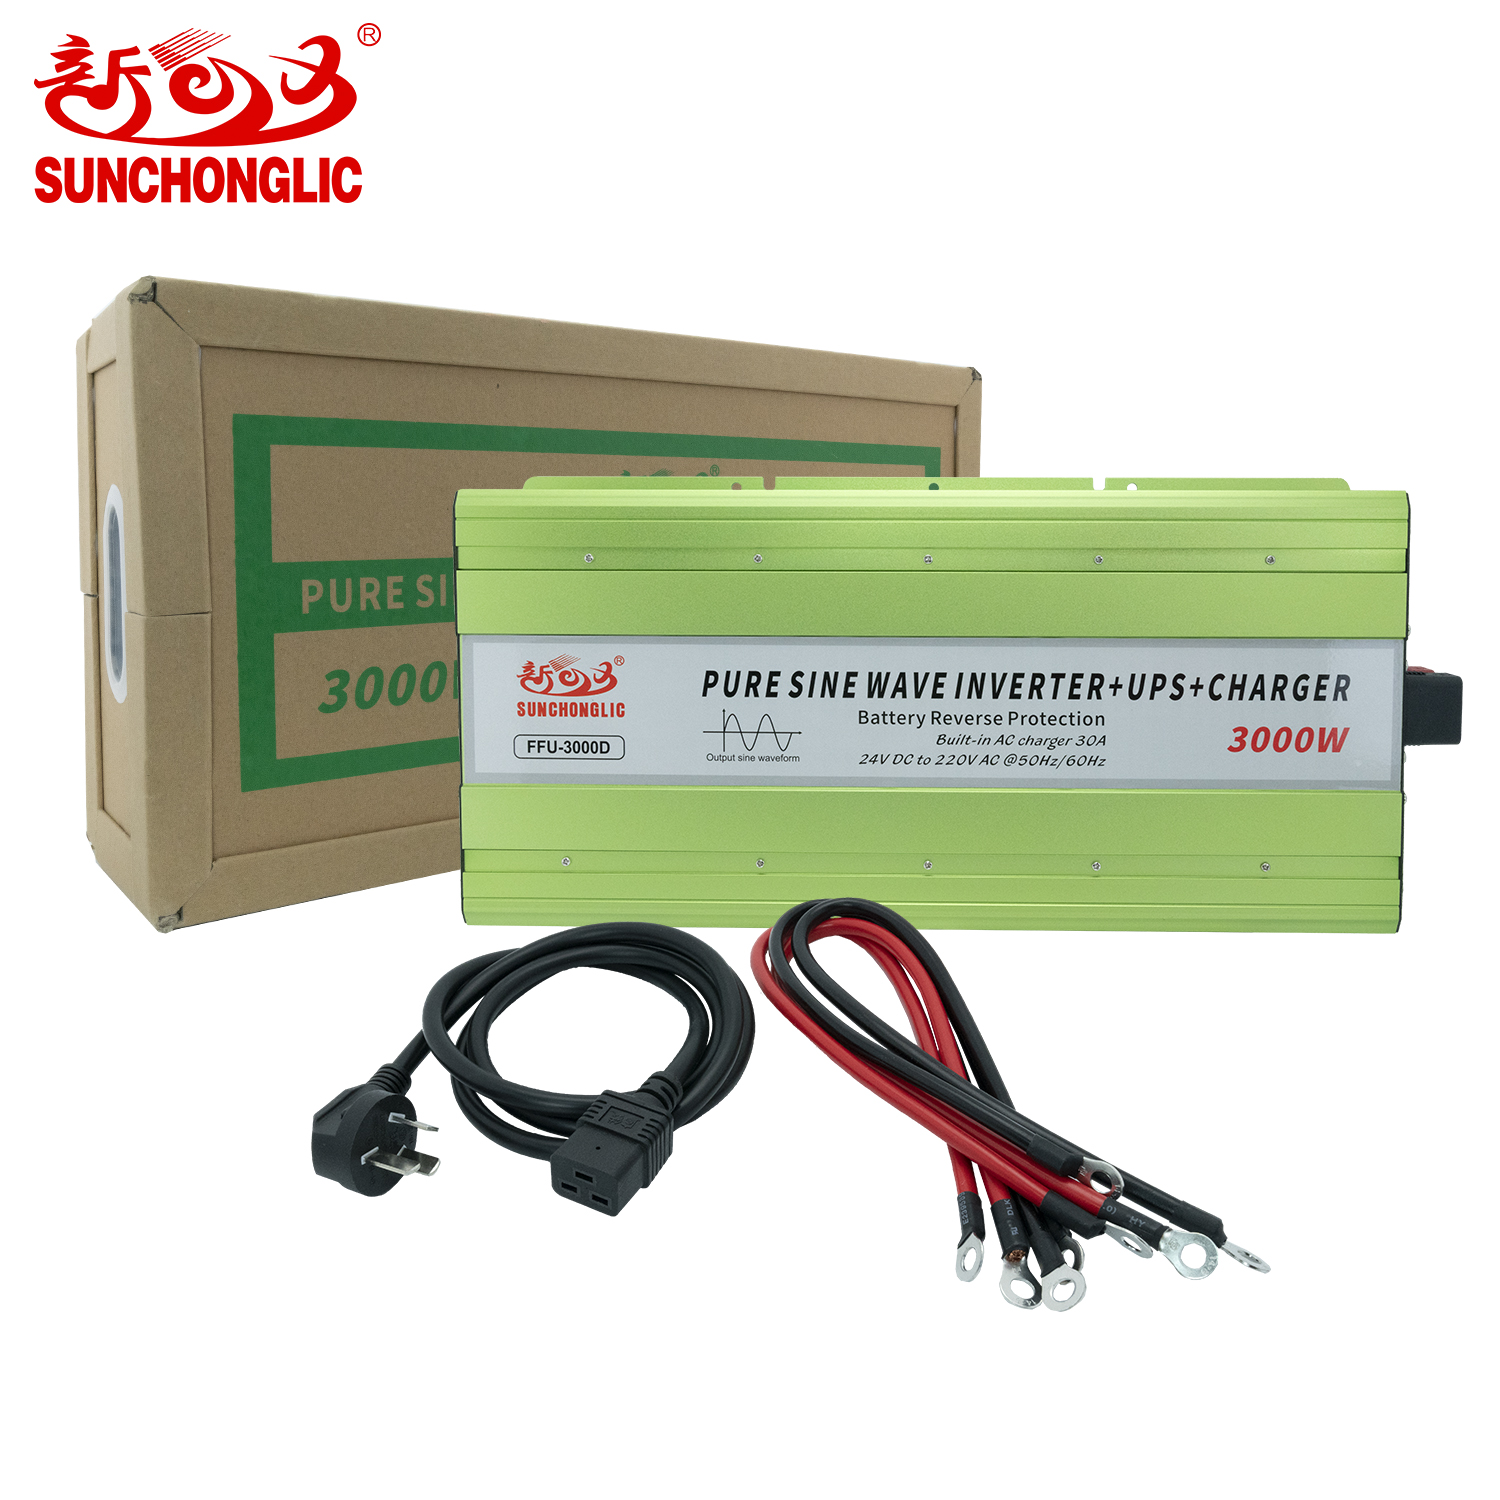 Sunchonglic 24V 220v 3000W 3000 watt inverter charger UPS pure sine wave inverter with 30A AC charger